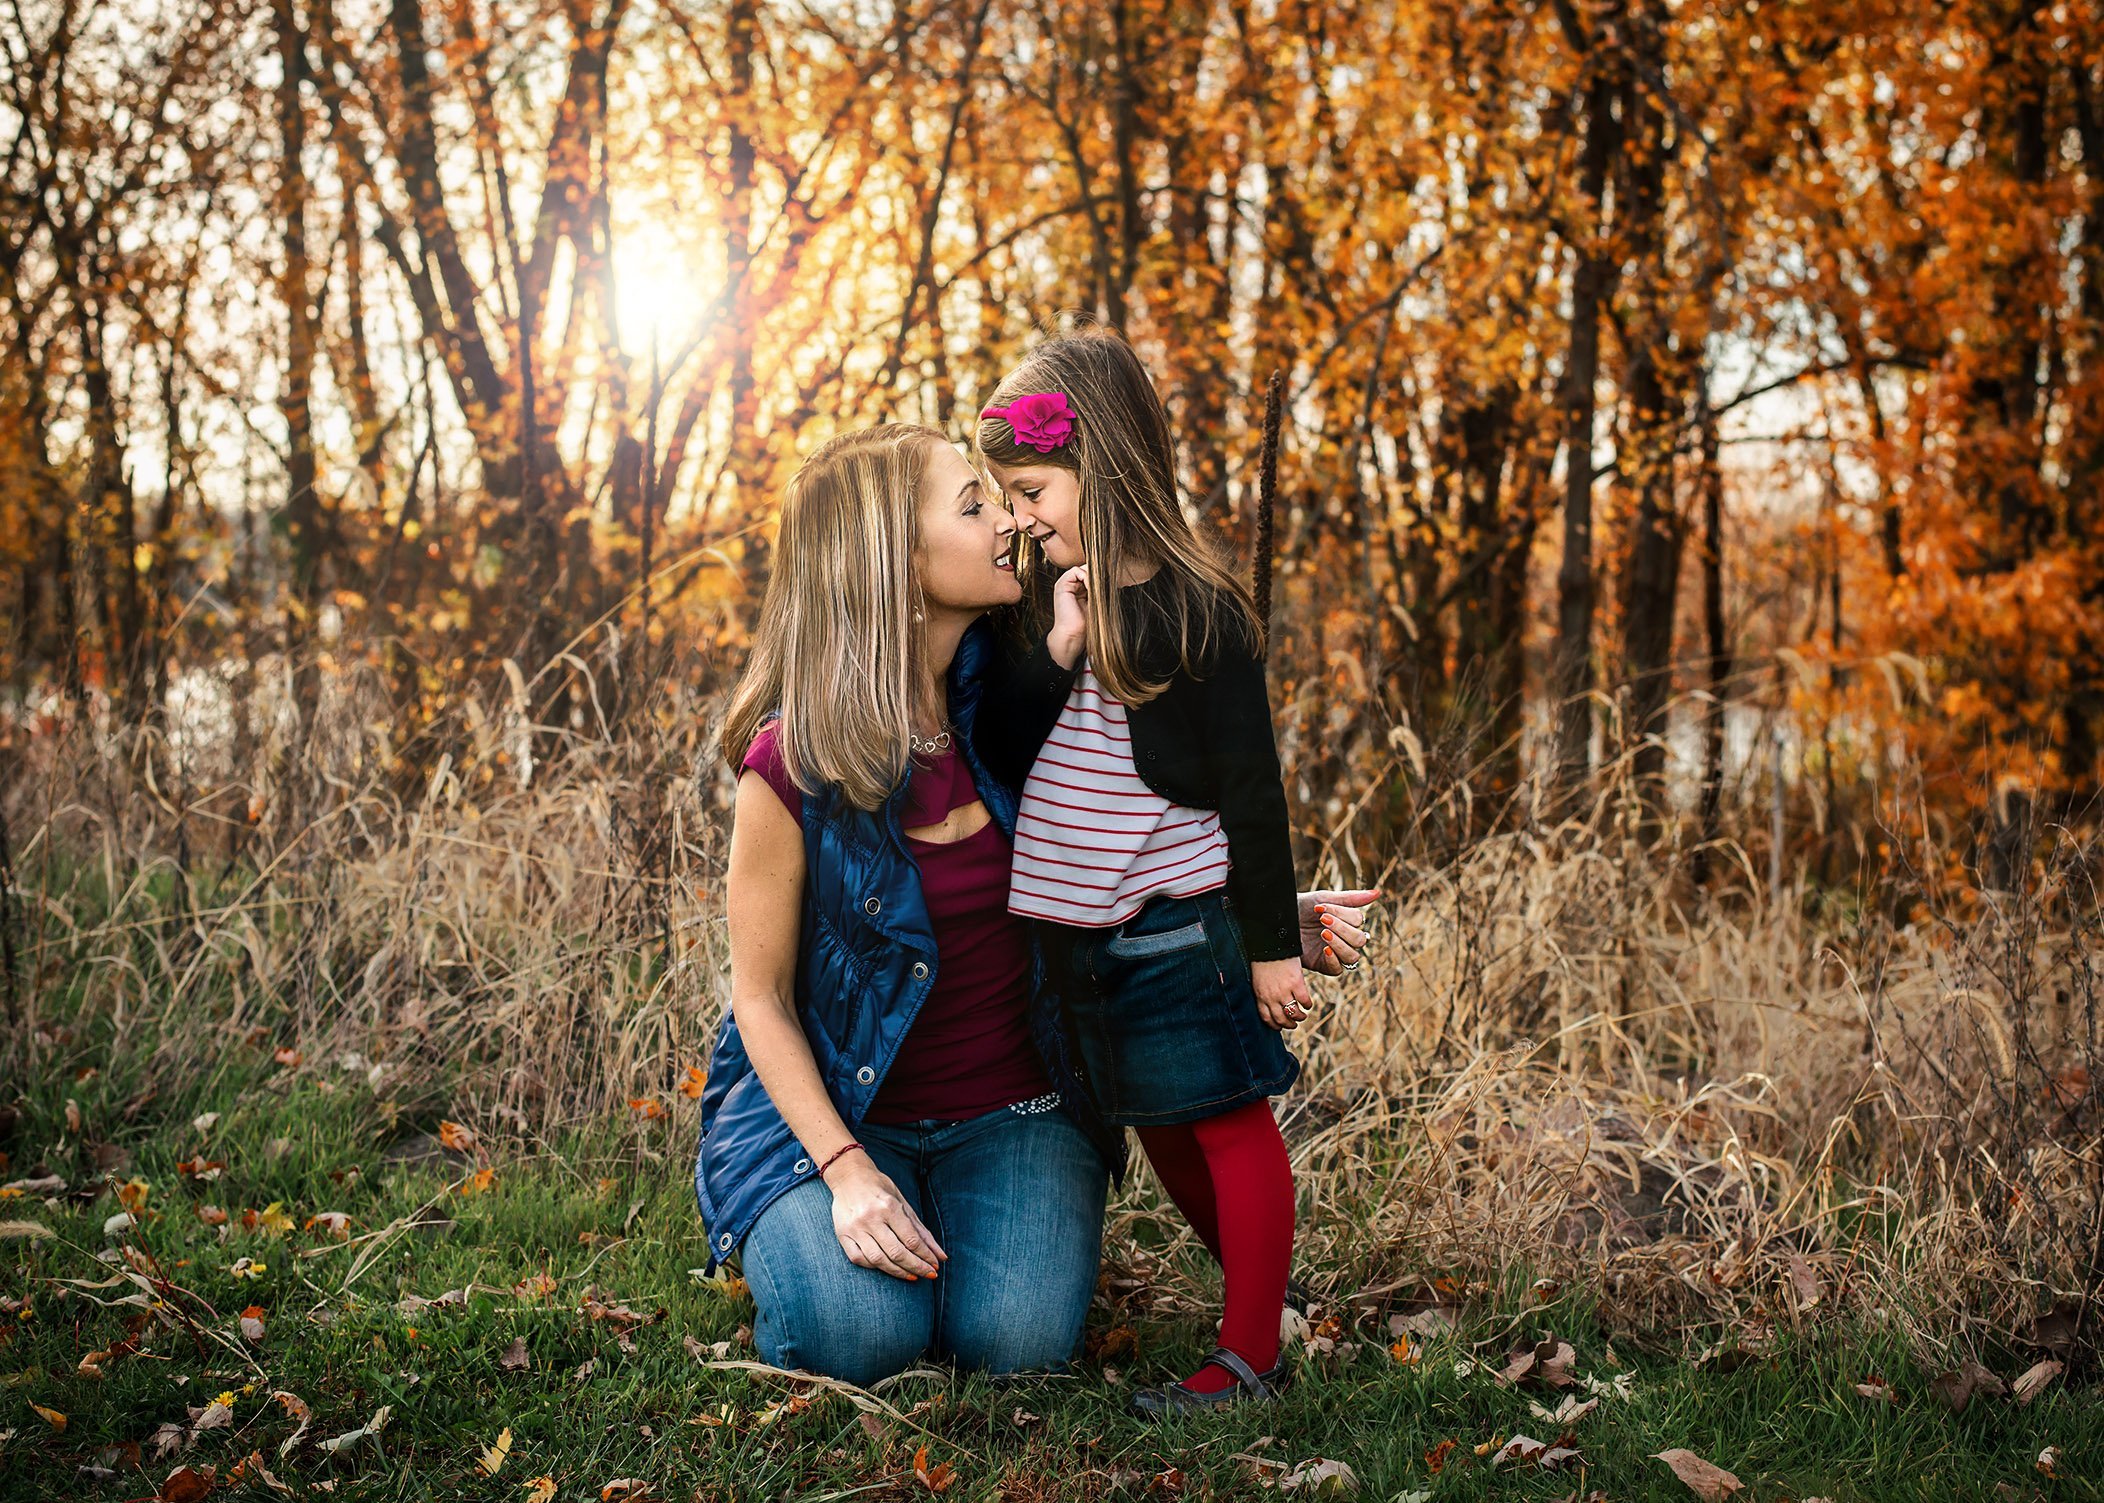 Mom and young daughter exchange nose kisses at sunset in the fall